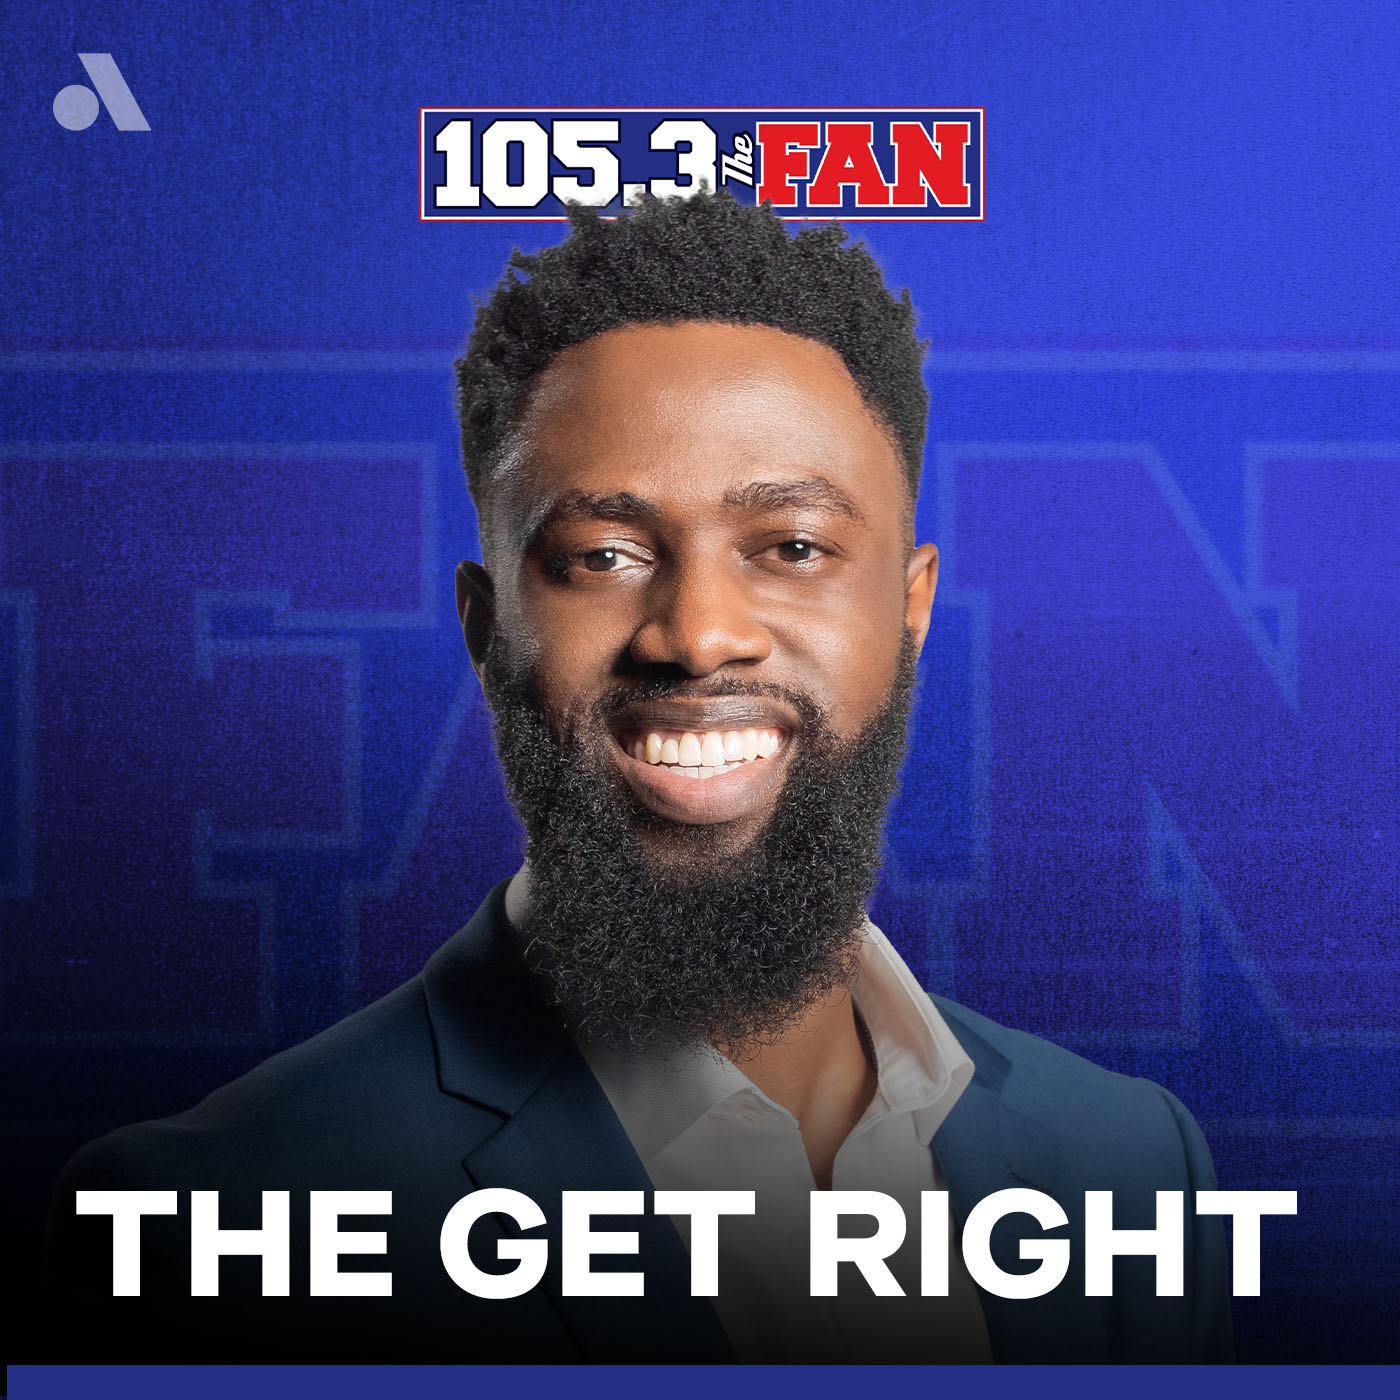 Rangers Offense in a Rut; Forest Lee, Associate Editor of ESPN.com Los Angeles; Around the NFL